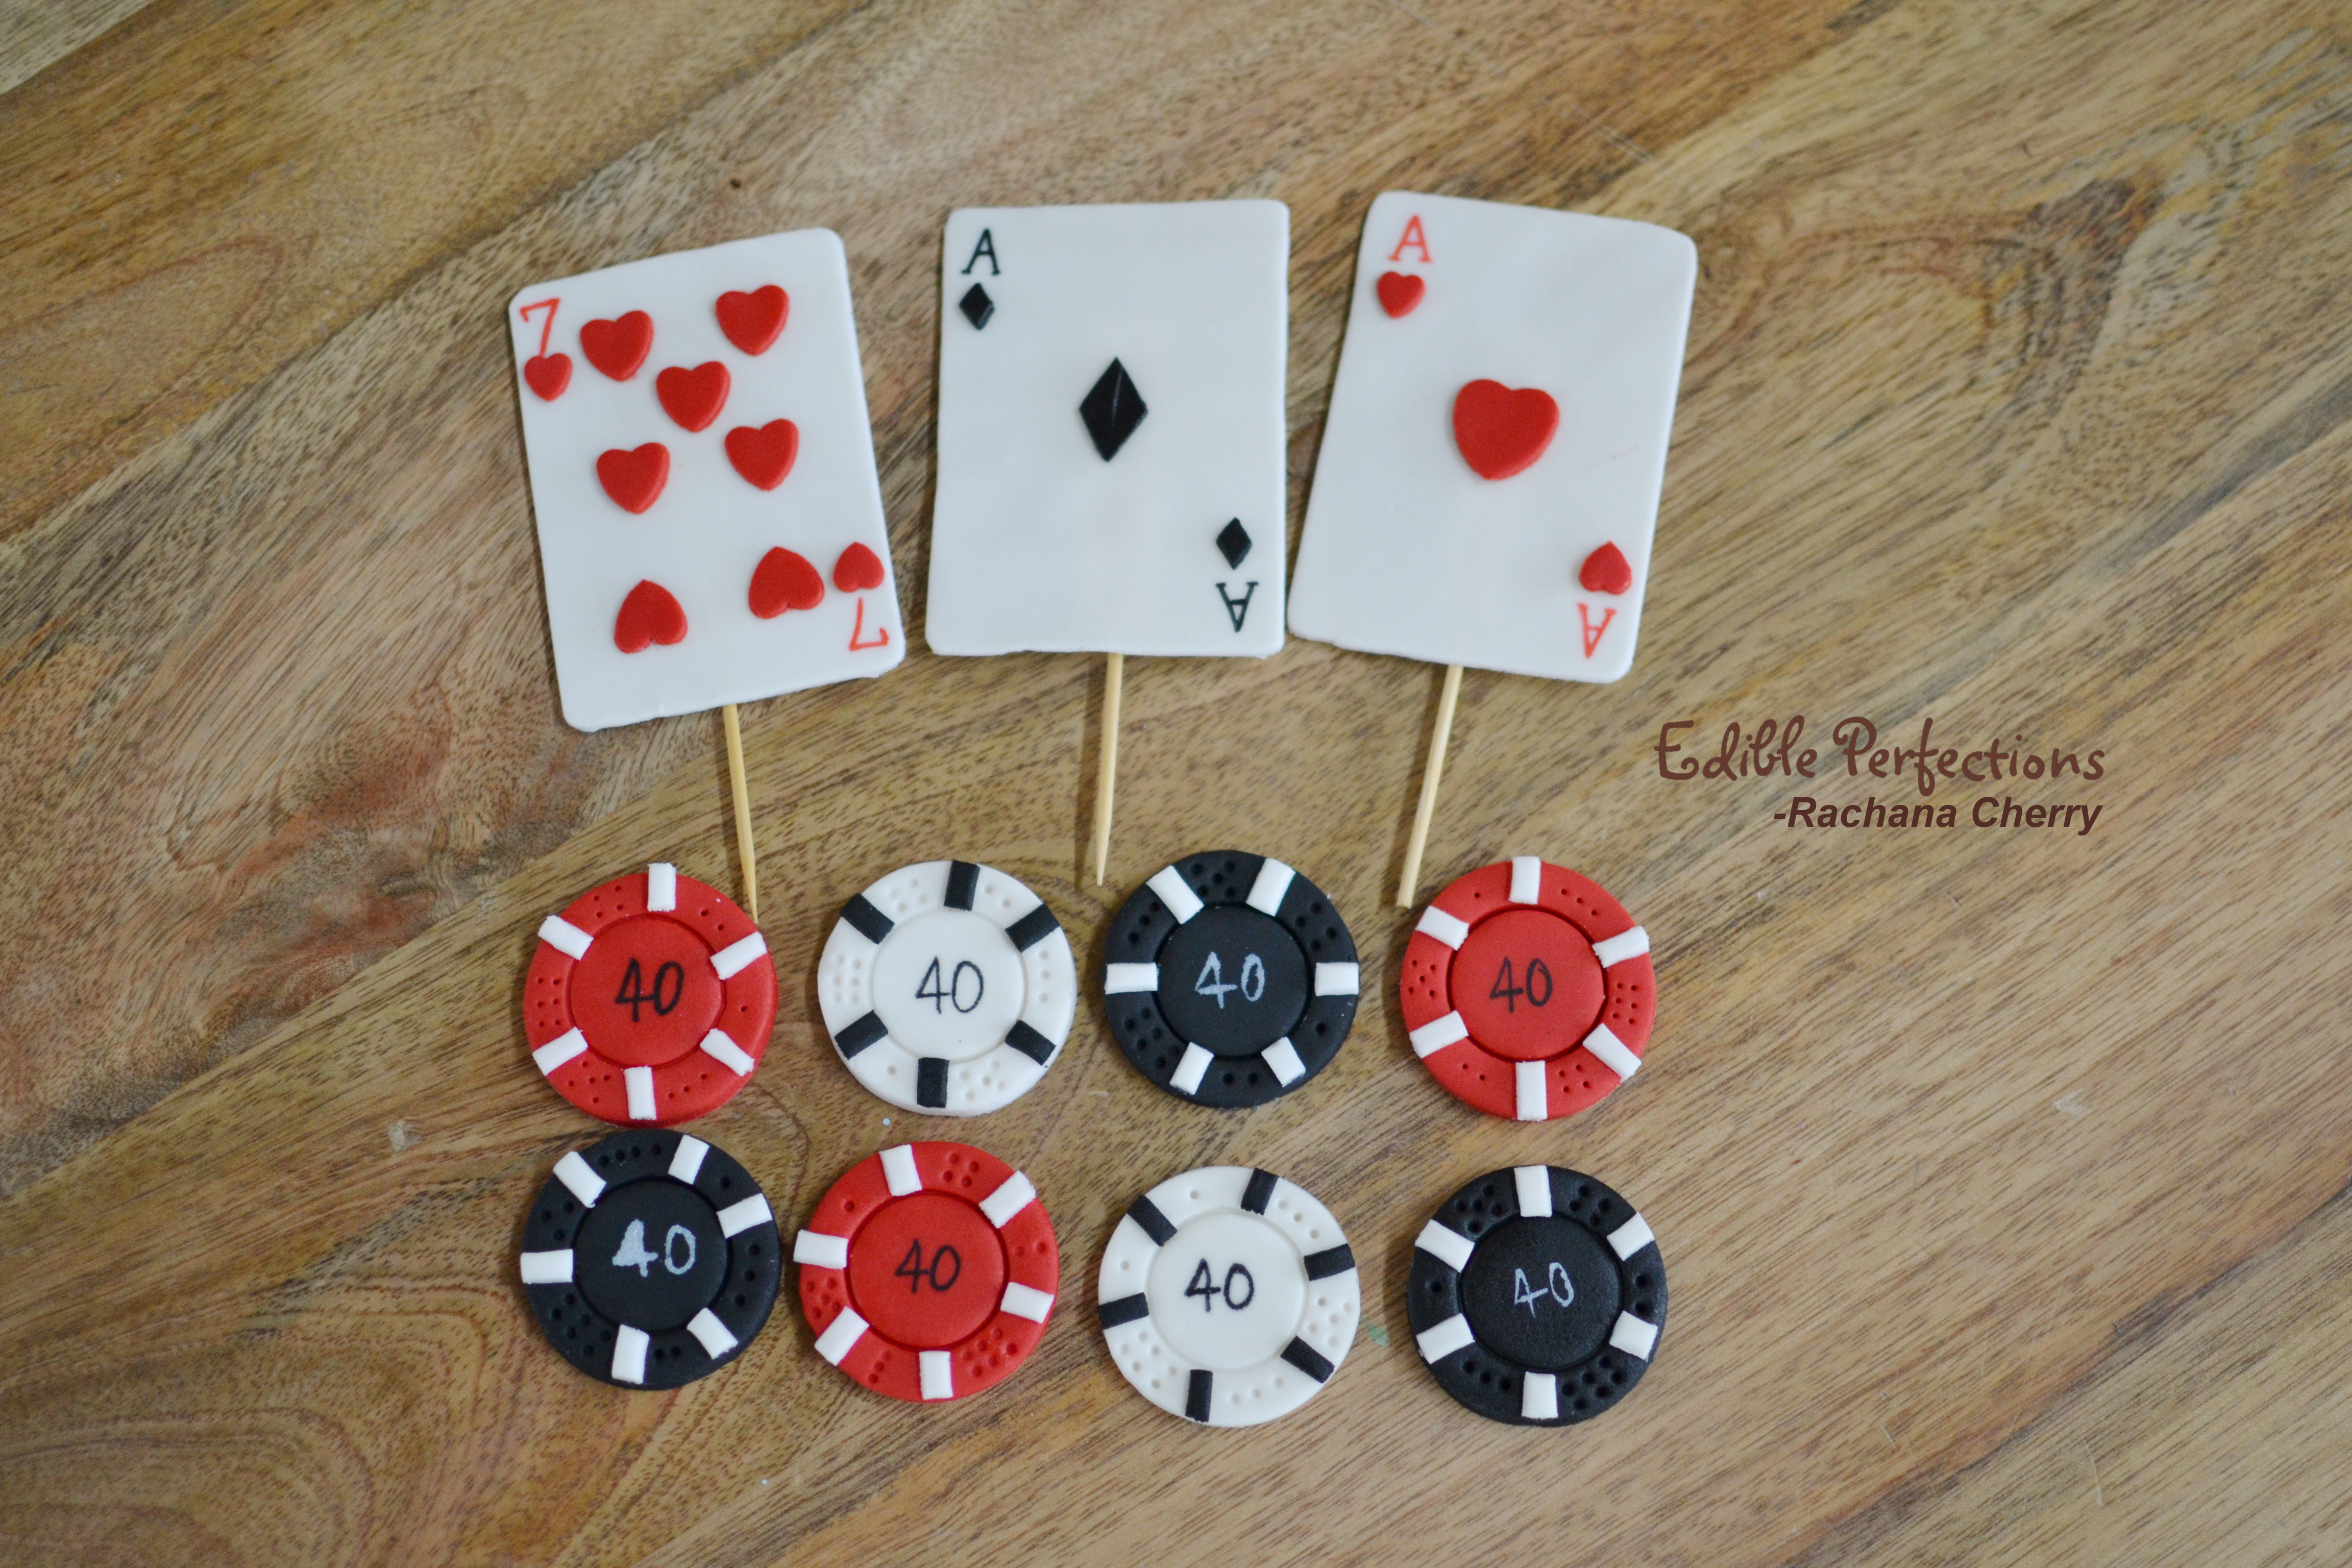 Casino theme cake toppers - Edible Perfections